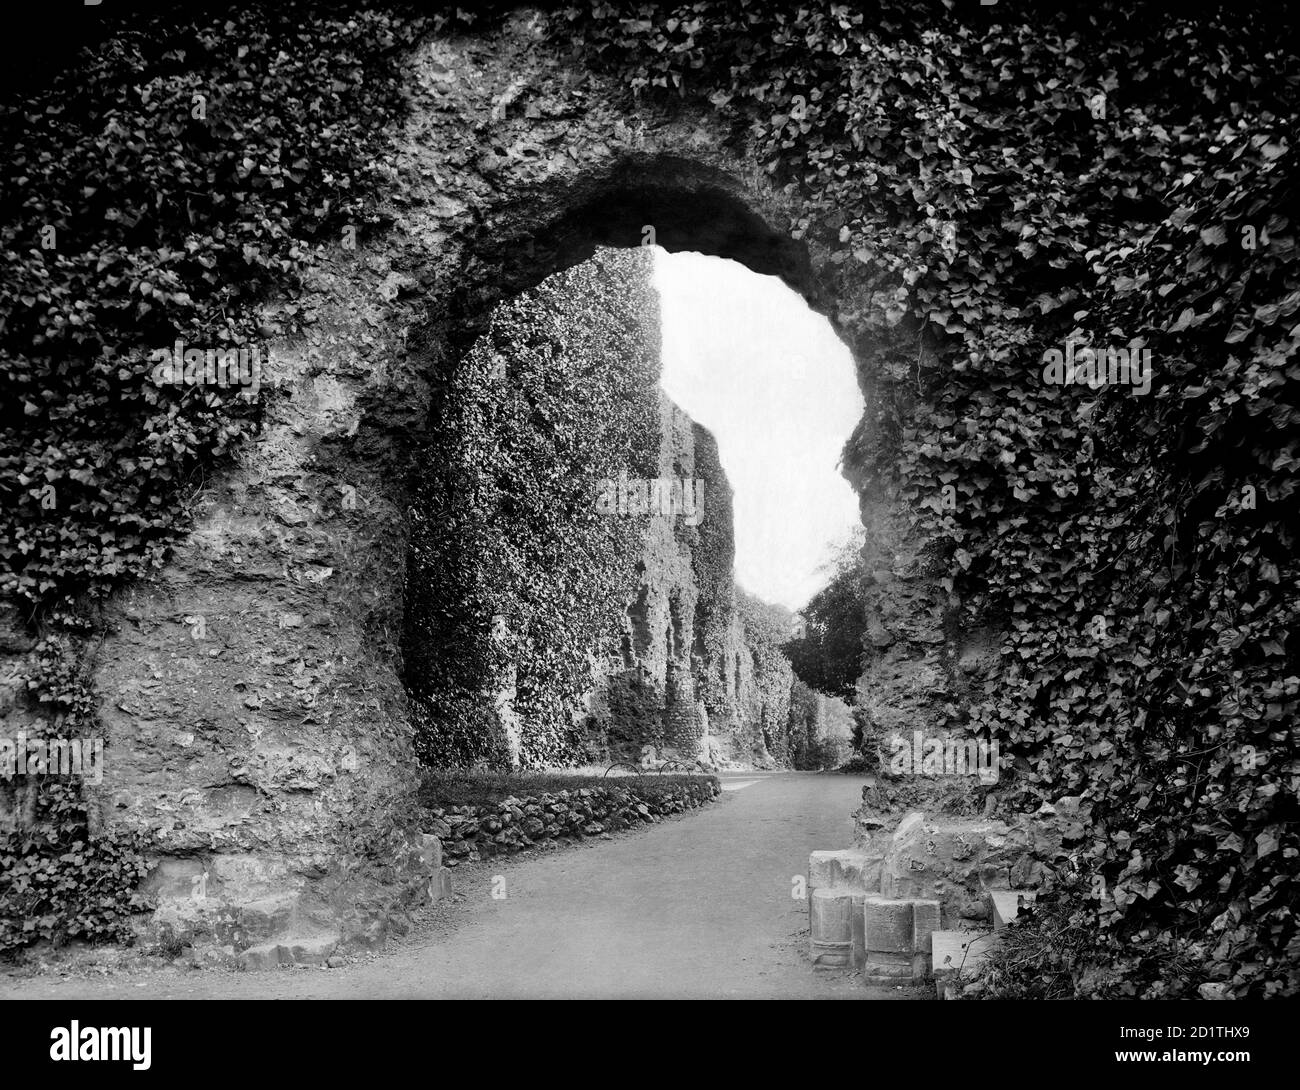 READING ABBEY, Reading Abbey, Berkshire. The ruins of the entrance to the east cloister looking south. The Abbey was founded by King Henry I in 1121. It became a royal palace of King Henry VIII after the dissolution of the monasteries in 1537. Photographed in 1890 by Henry Taunt. Stock Photo